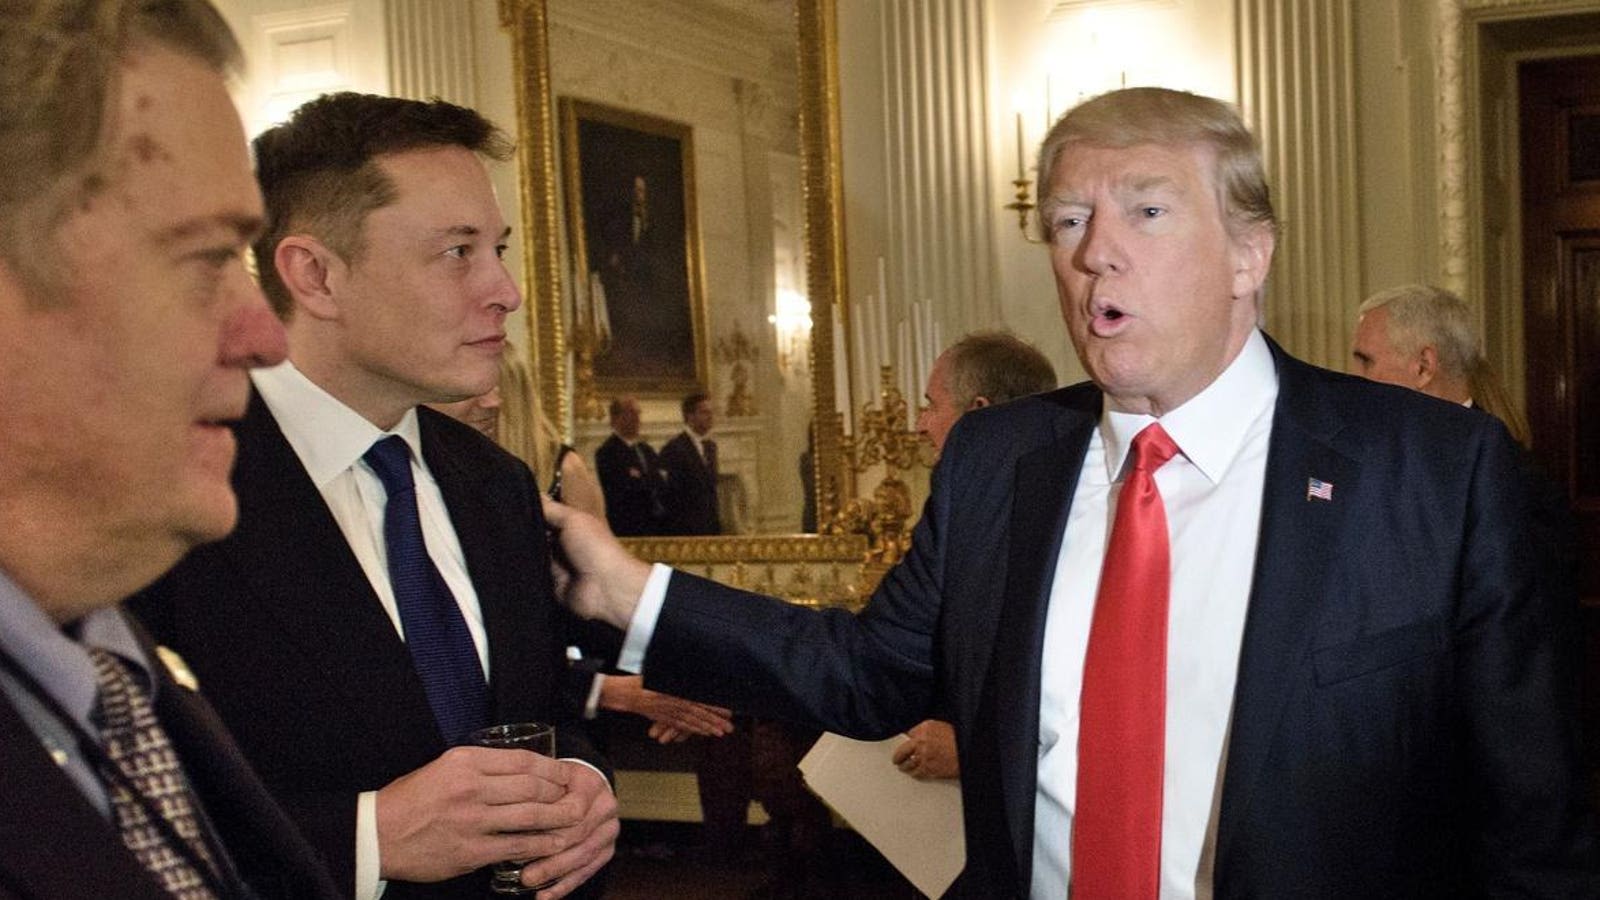 Here's How A Trump Presidency Could Help Tesla Stock Despite His Dire Plans For EVs, Analyst Says